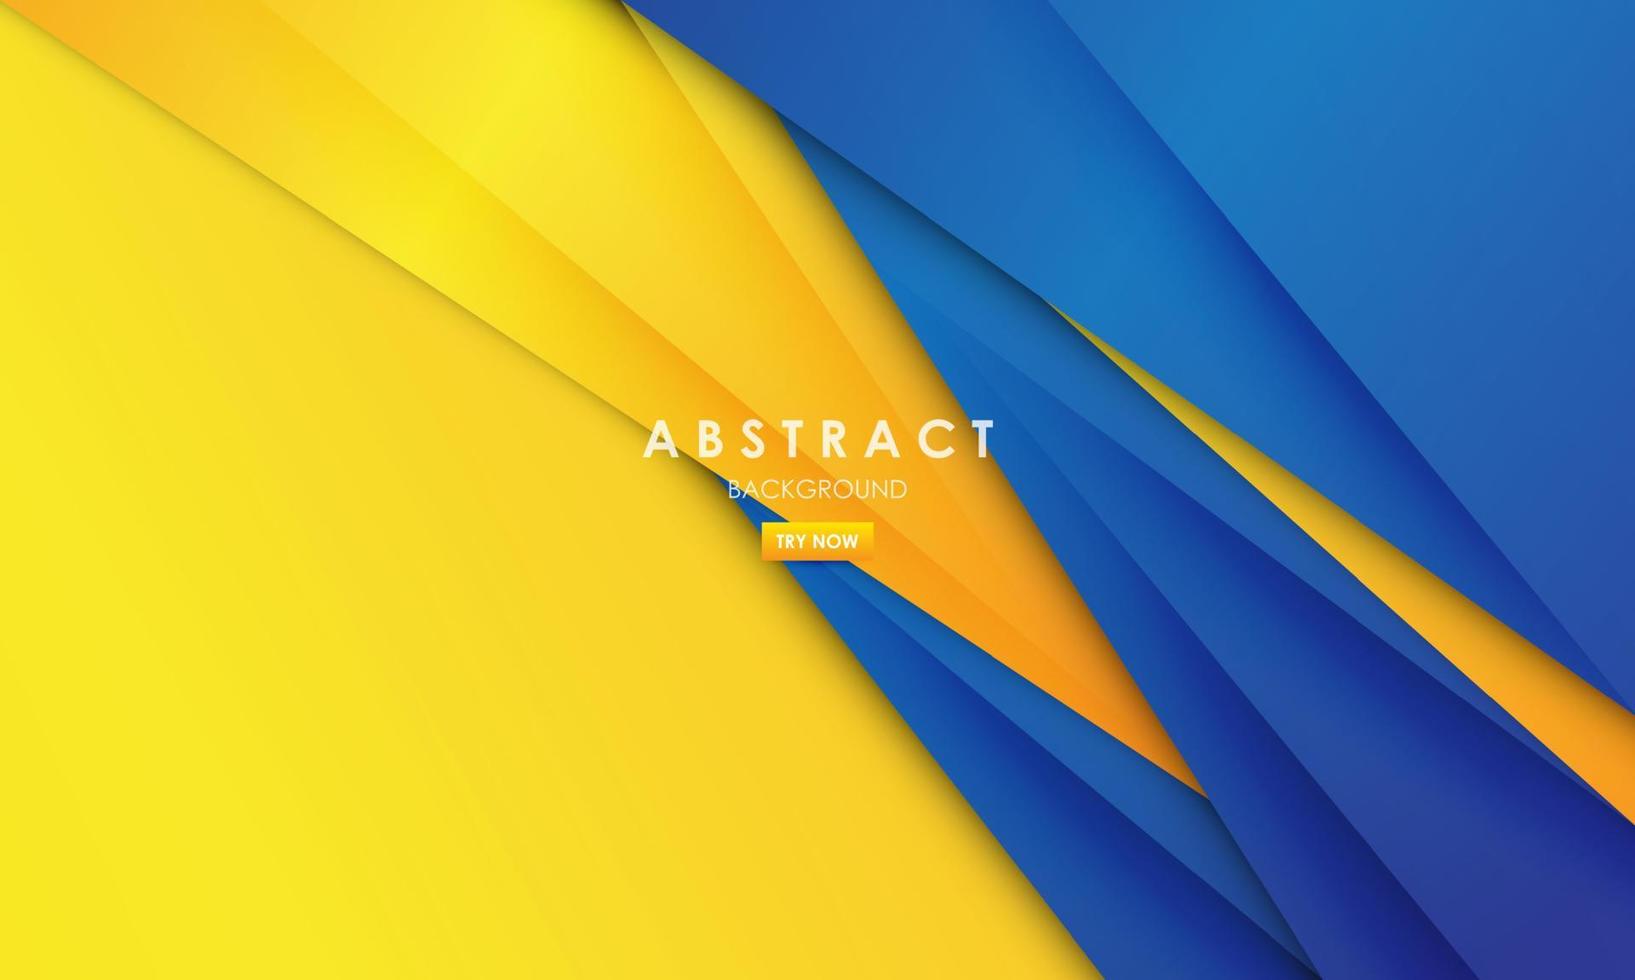 Modern abstract background blue and yellow color vector